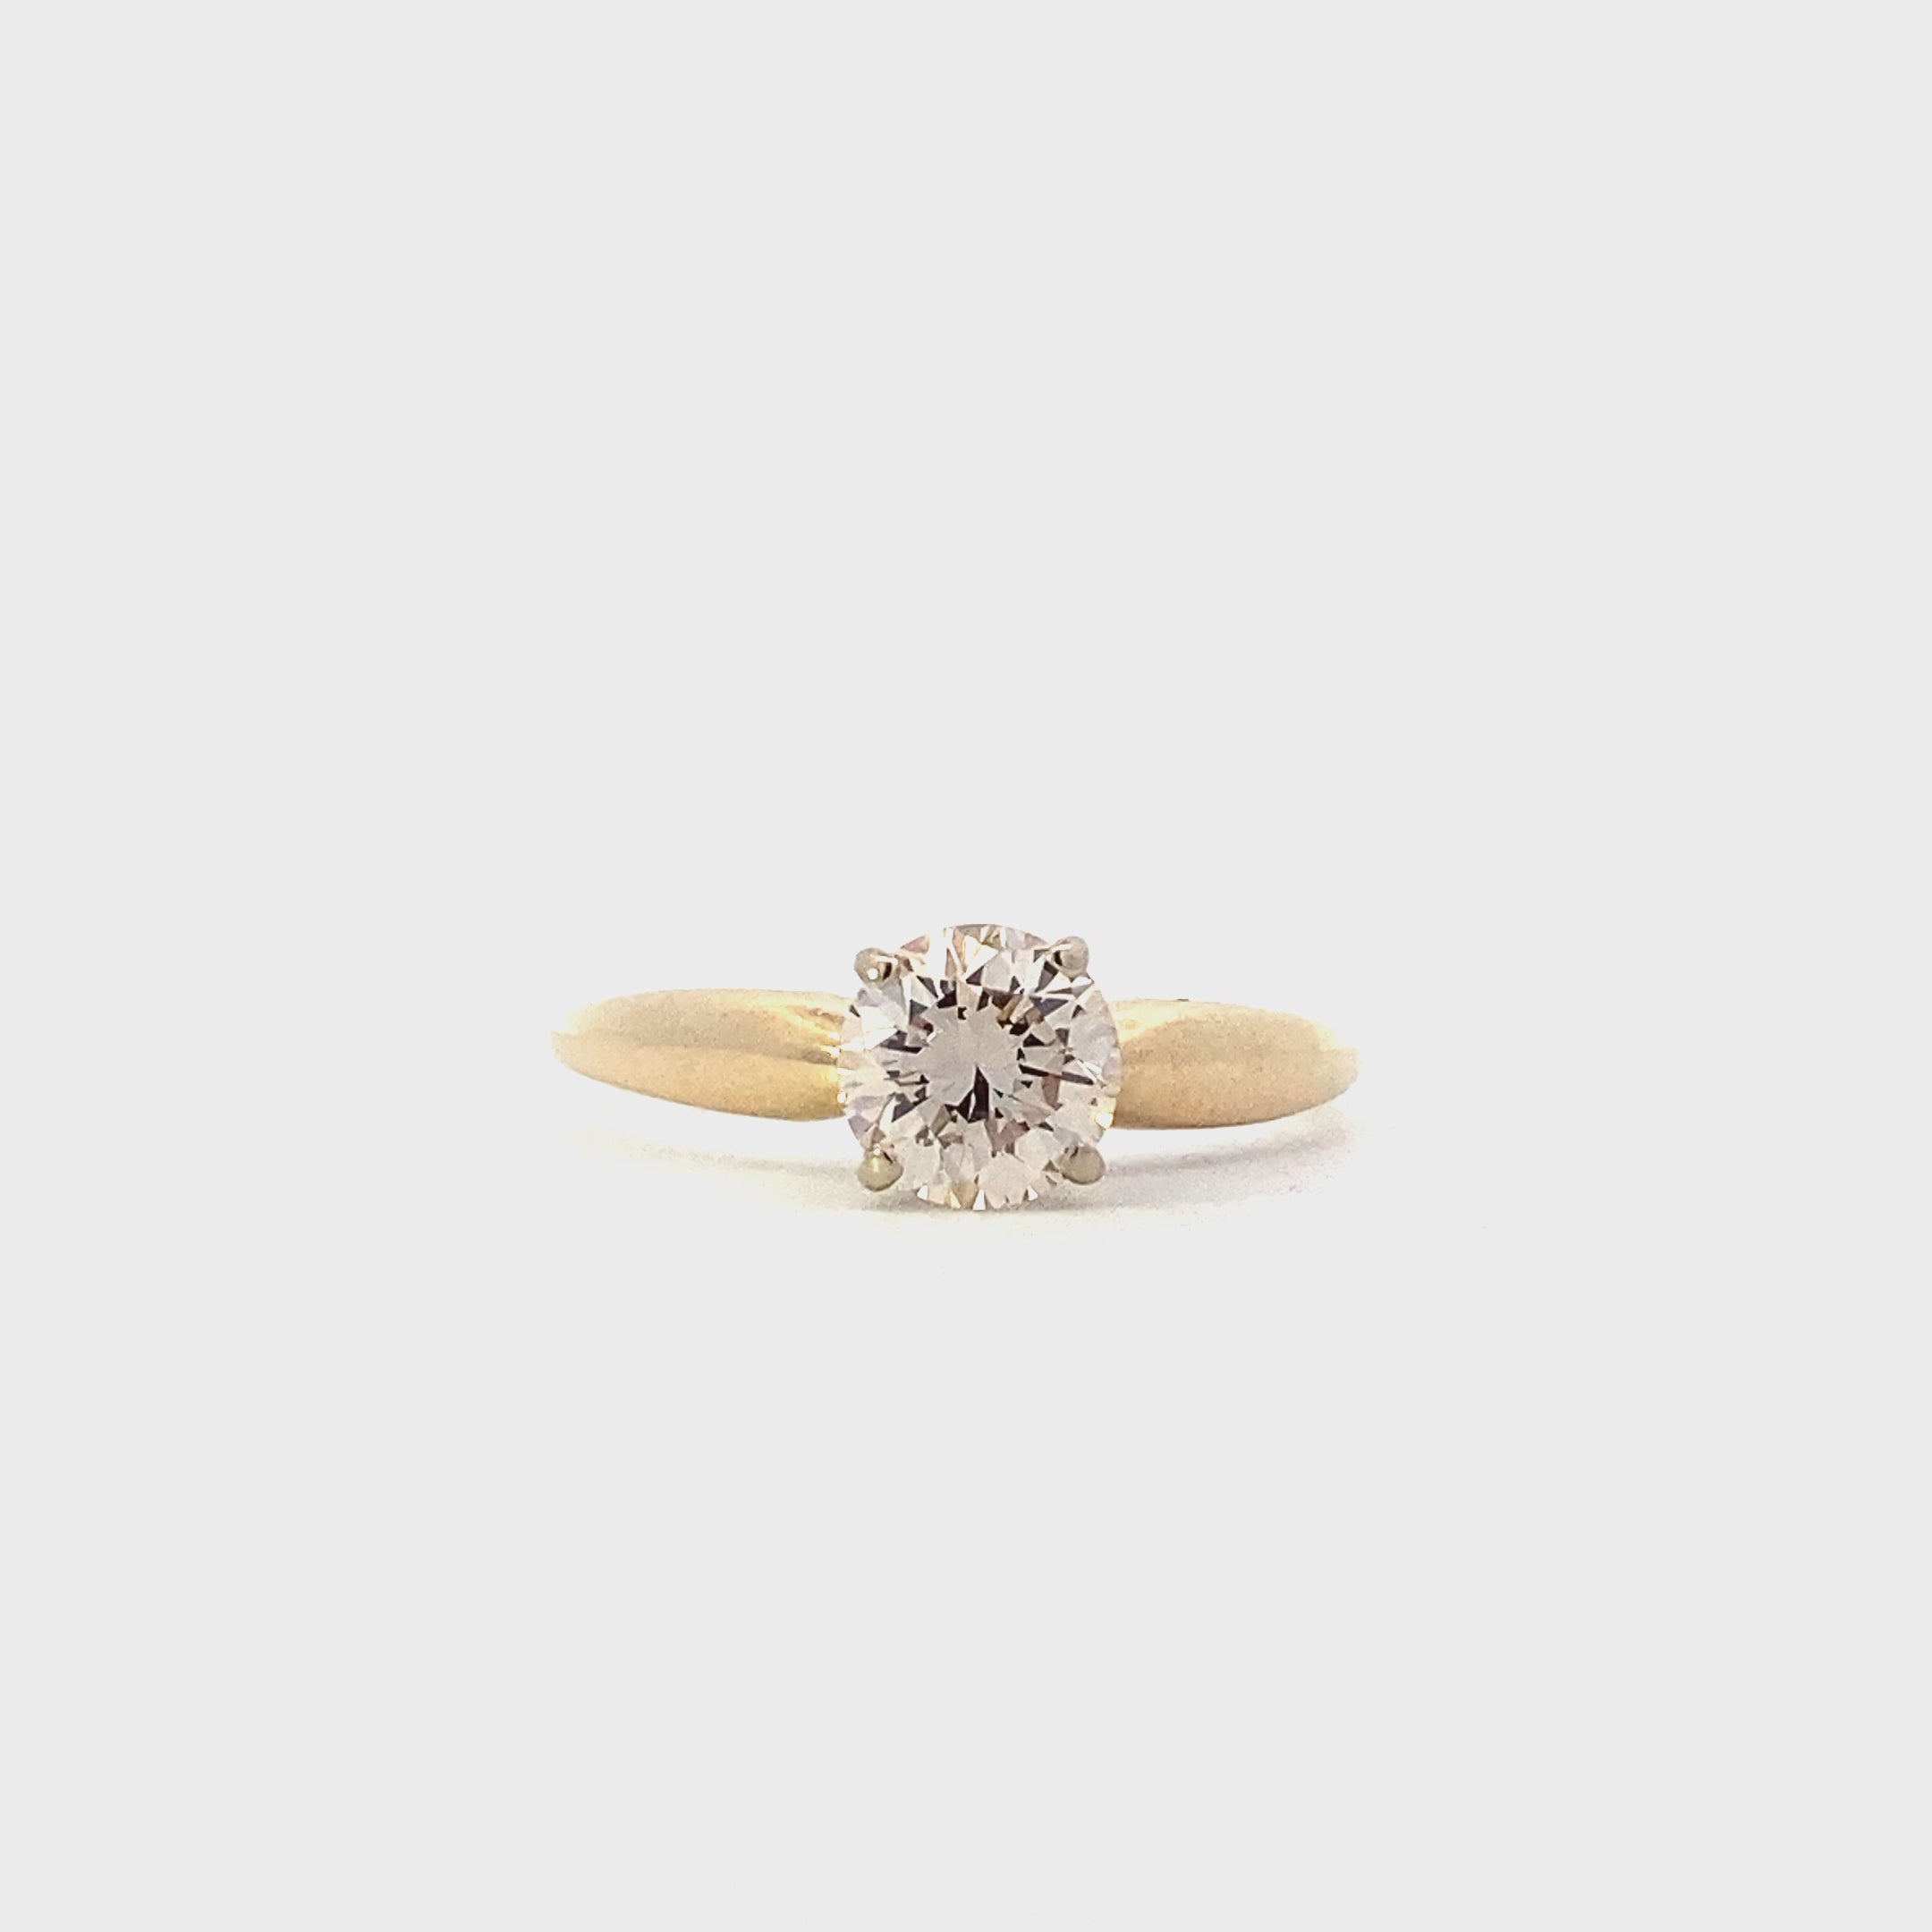 14K Yellow Gold Diamond Solitaire Ring - 1.02ct